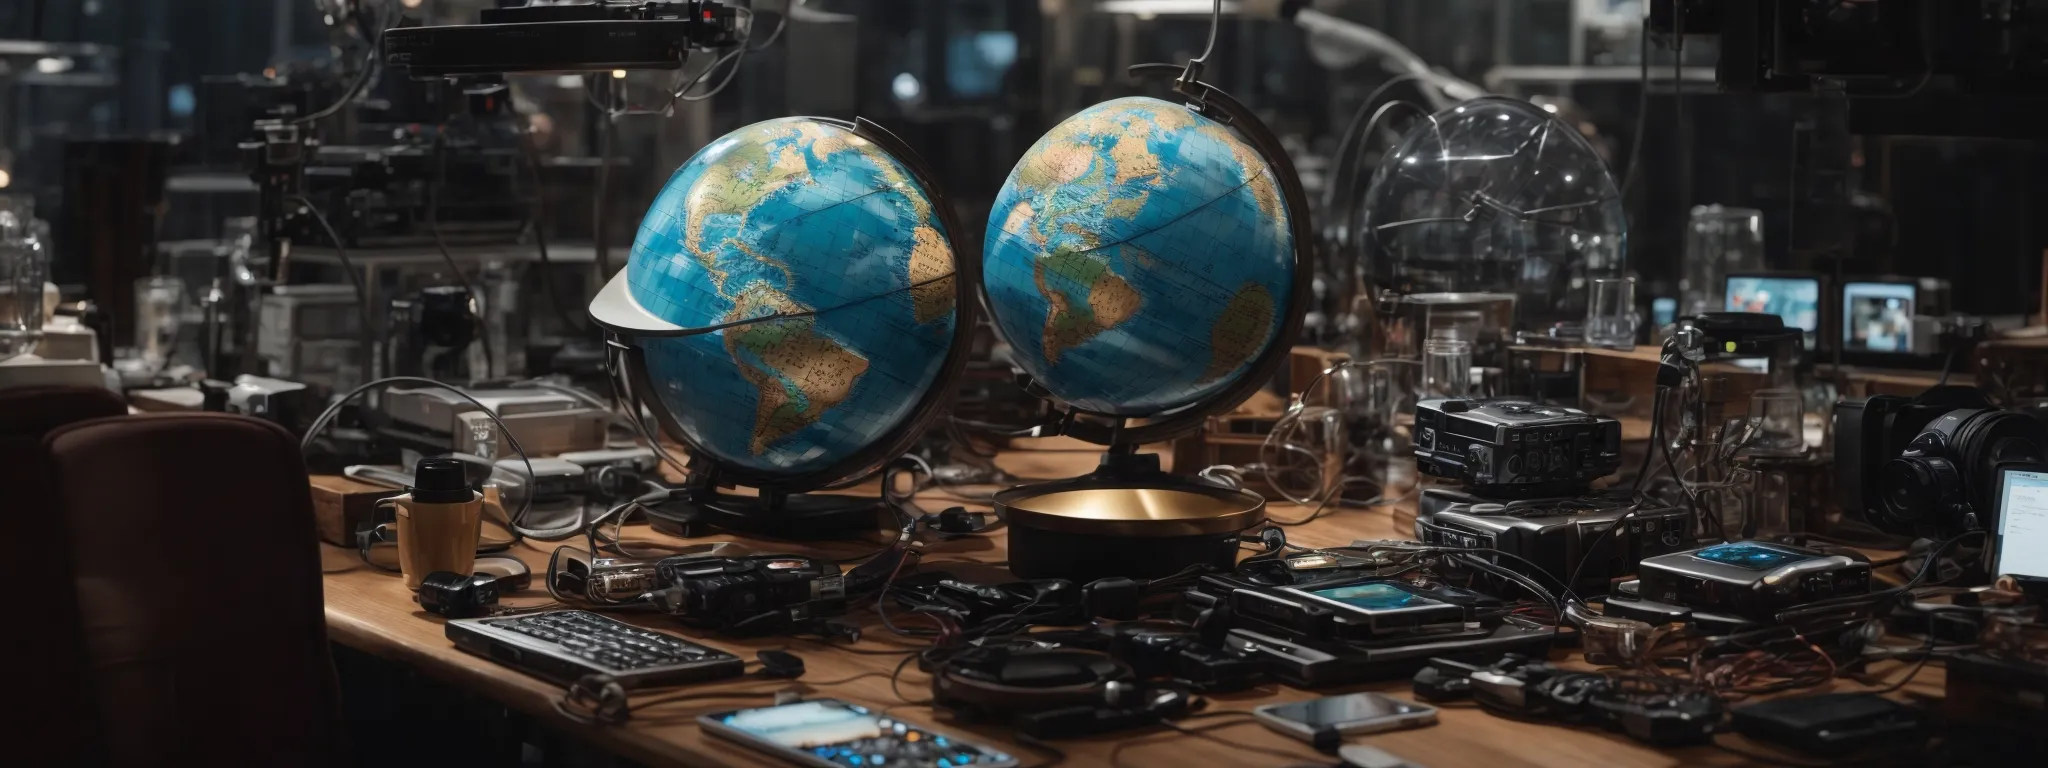 a globe surrounded by various technological devices illustrating global digital connectivity.